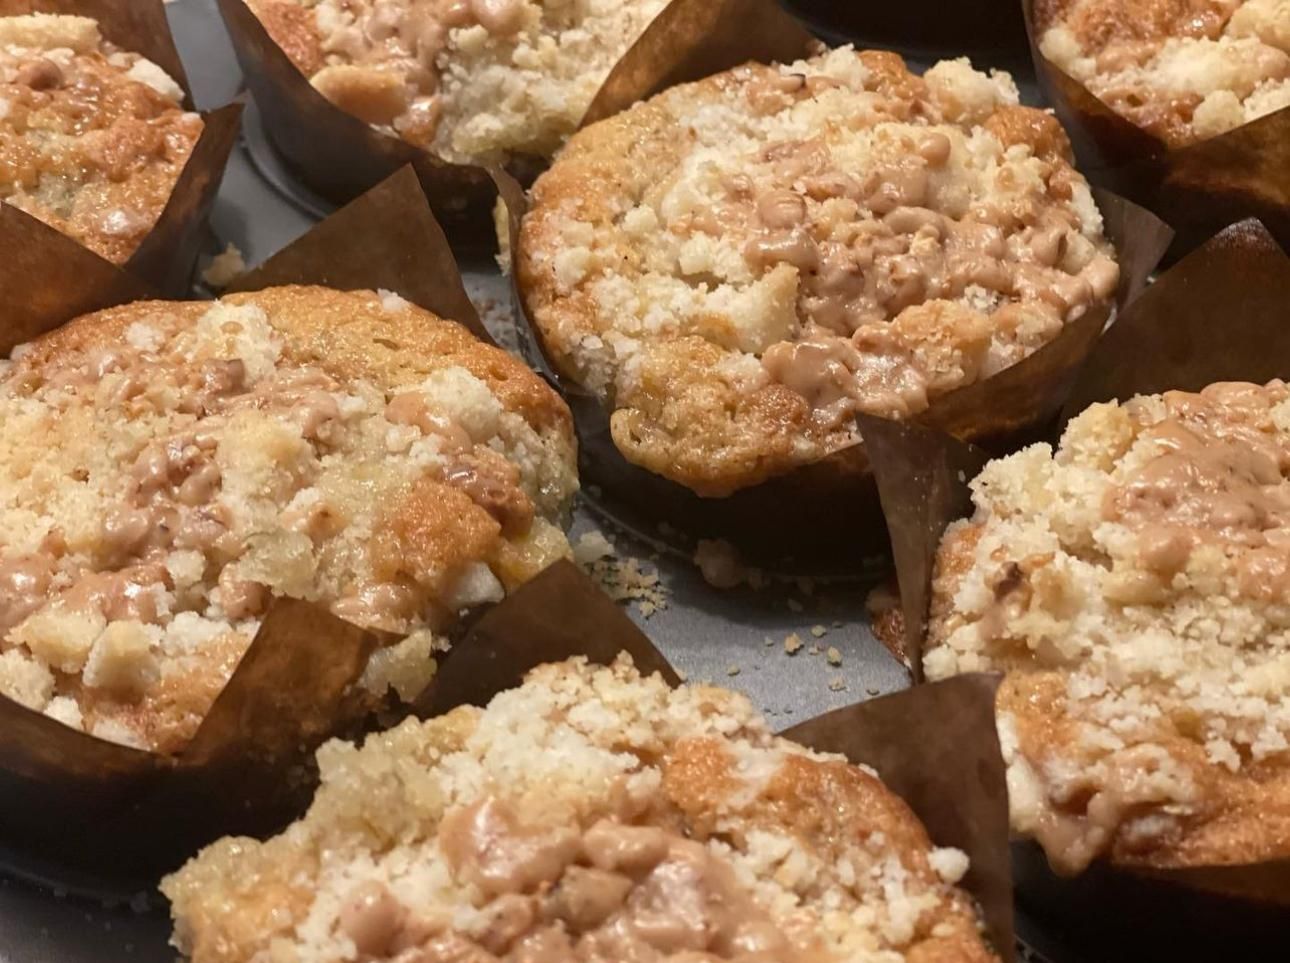 Banana Bourbon Muffins with a Toffee Struesel